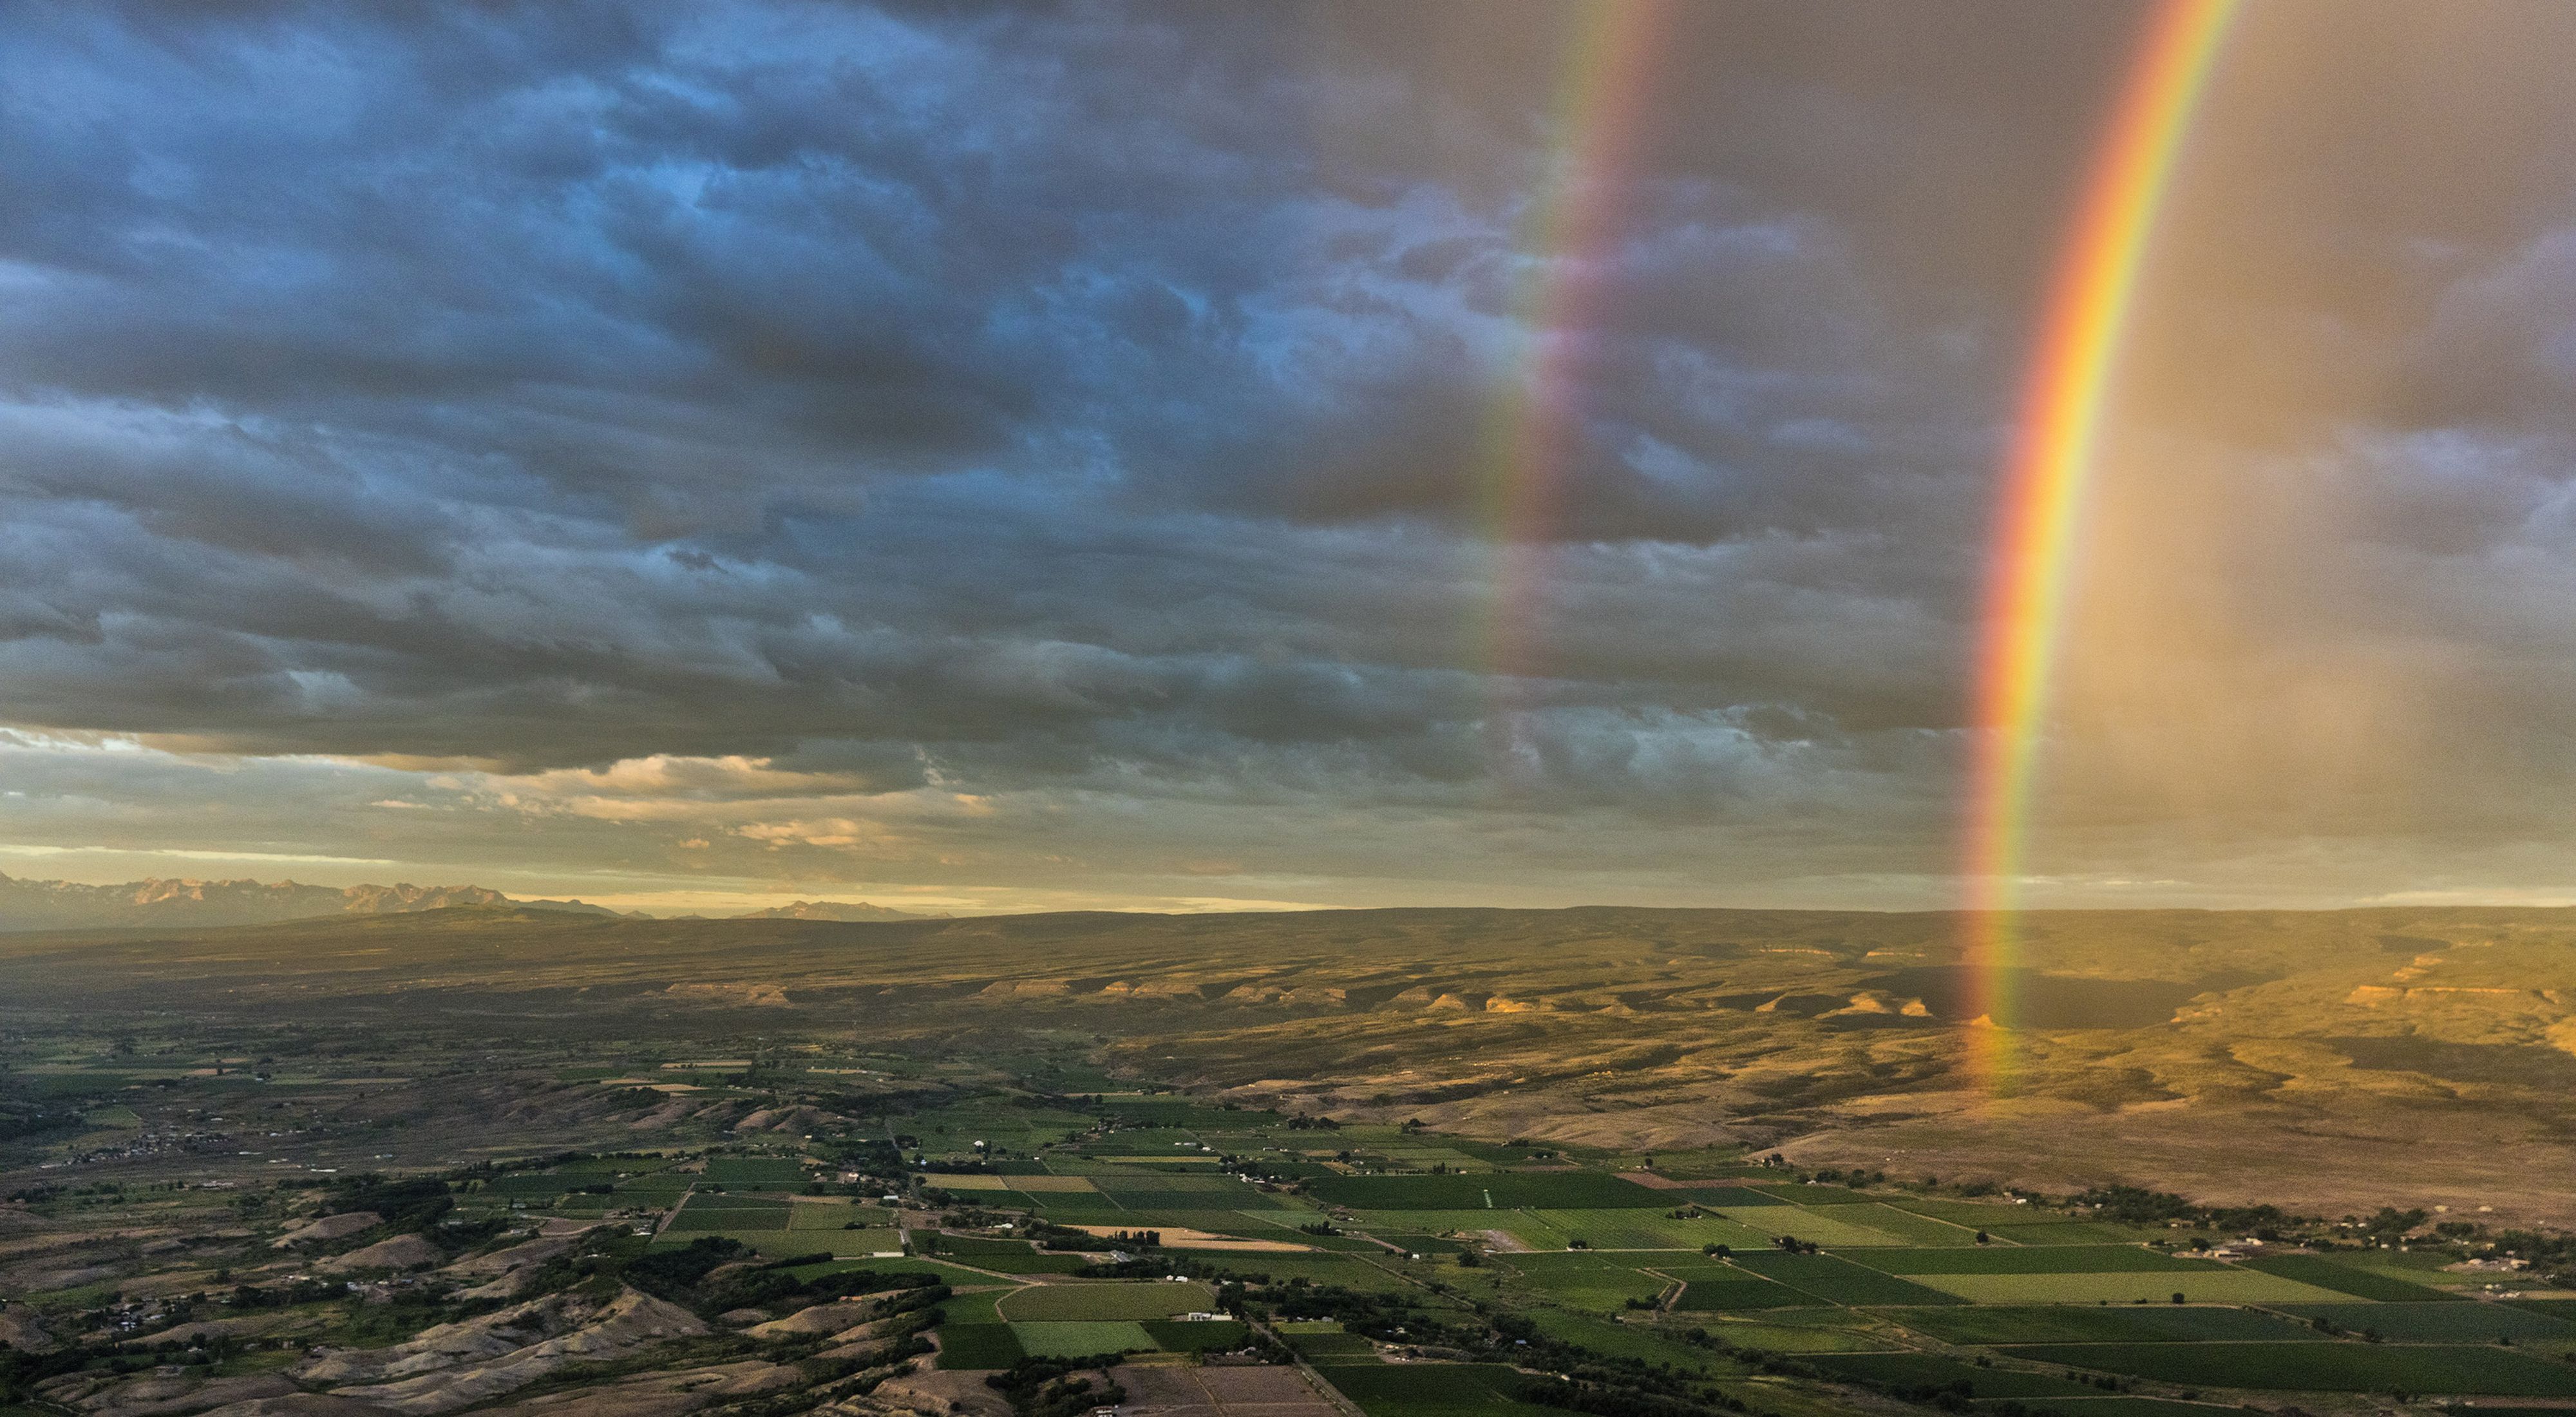 Aerial view of a valley with a rainbow on the right.